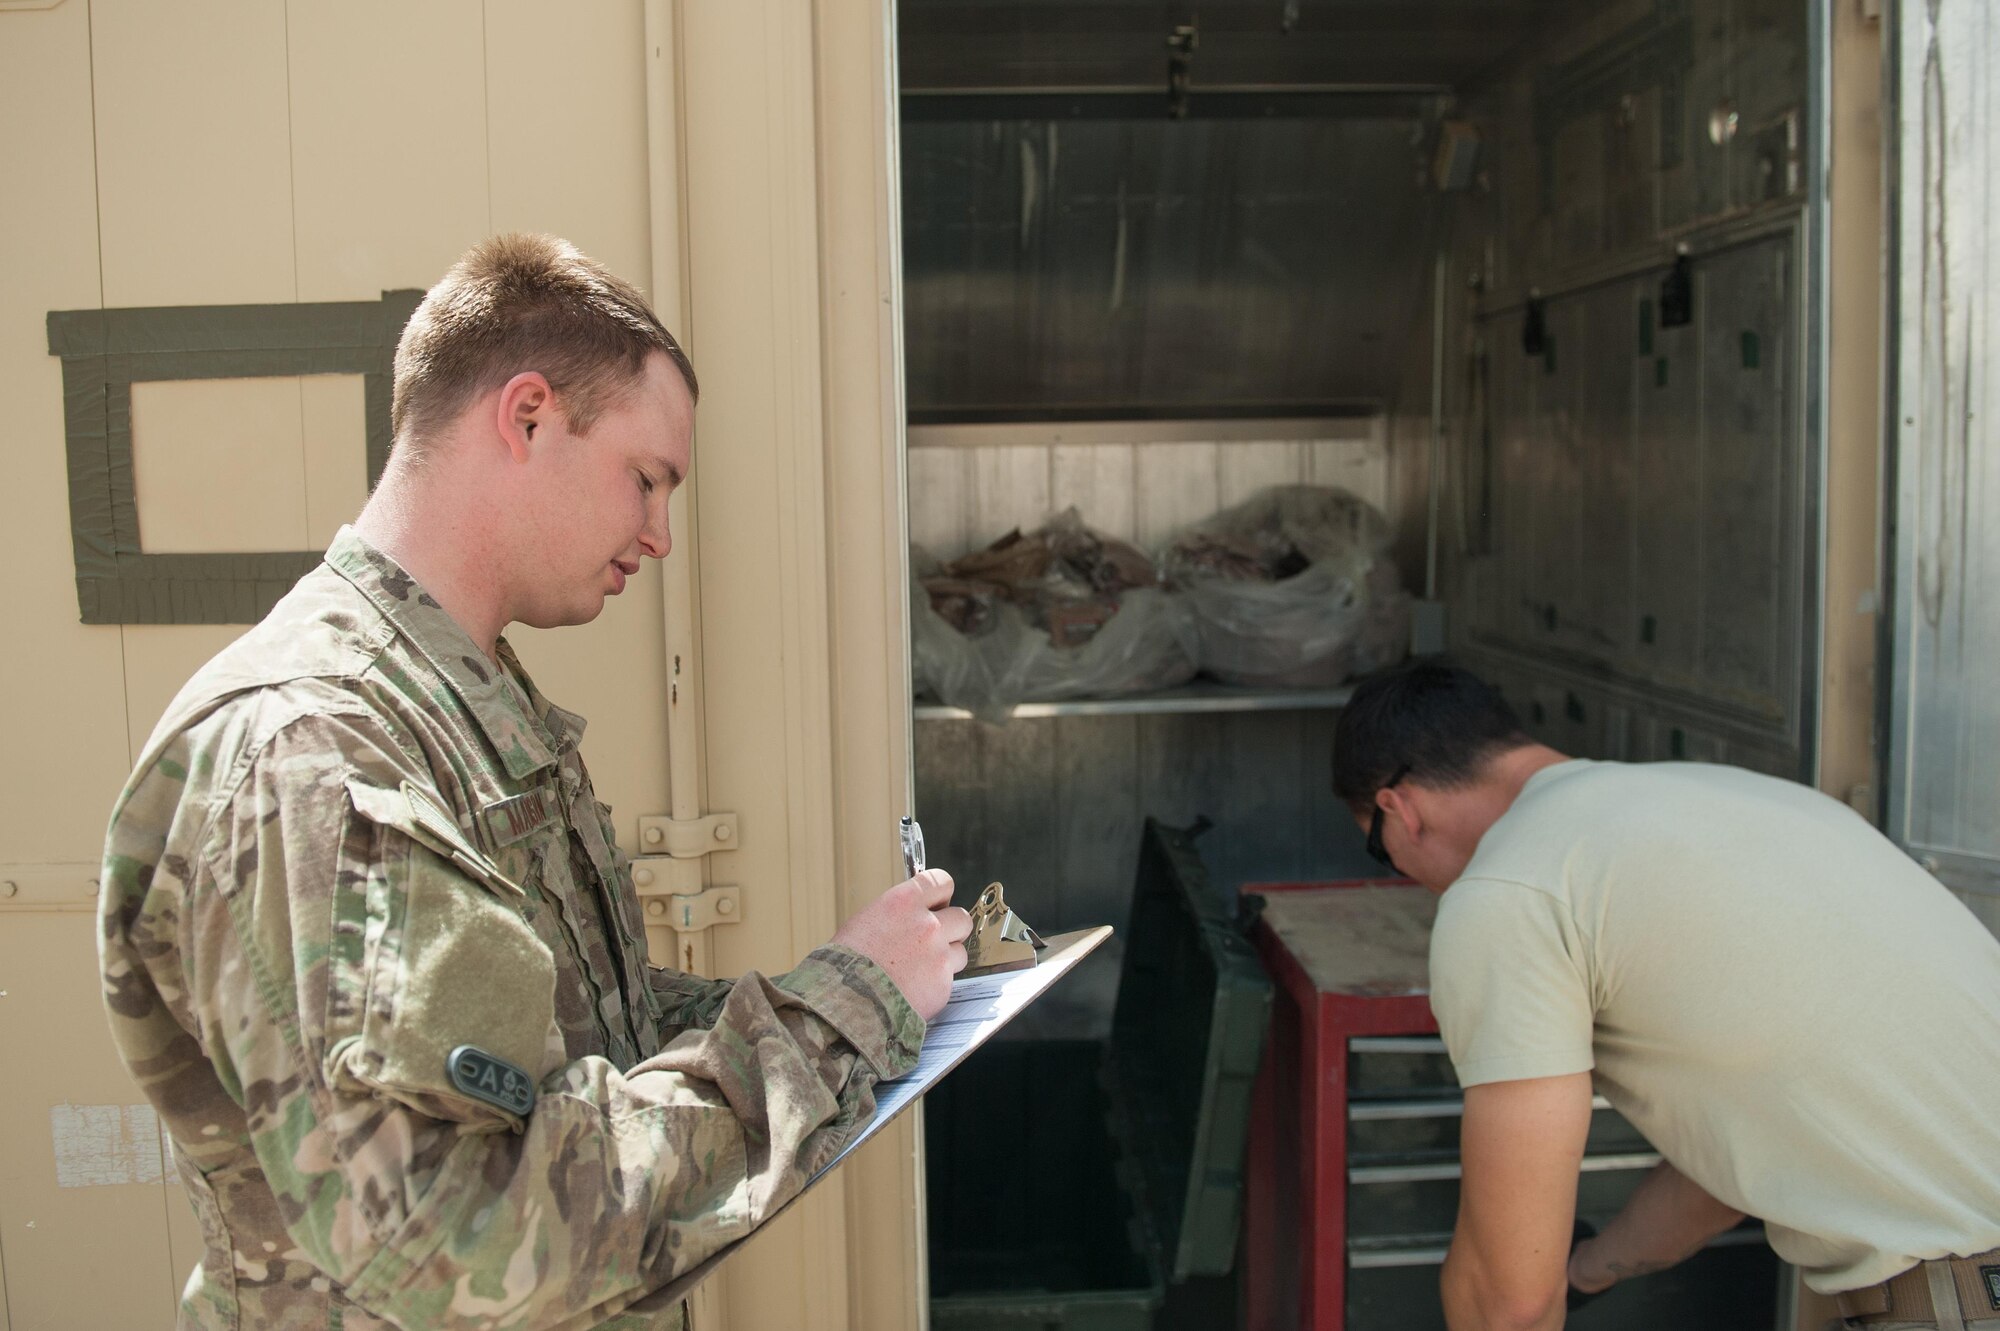 U.S. Air Force Staff Sgt. Cody Madison, 451st Expeditionary Support Squadron Central Command Material Recovery Element joint inspector, inventories assets at Kandahar Airfield, Aug. 15, 2015. Madison is responsible for identifying, storing and redeploying assets to the U.S. or disposing of items located throughout Afghanistan. (U.S. Air Force photo by Tech. Sgt. Joseph Swafford/Released)